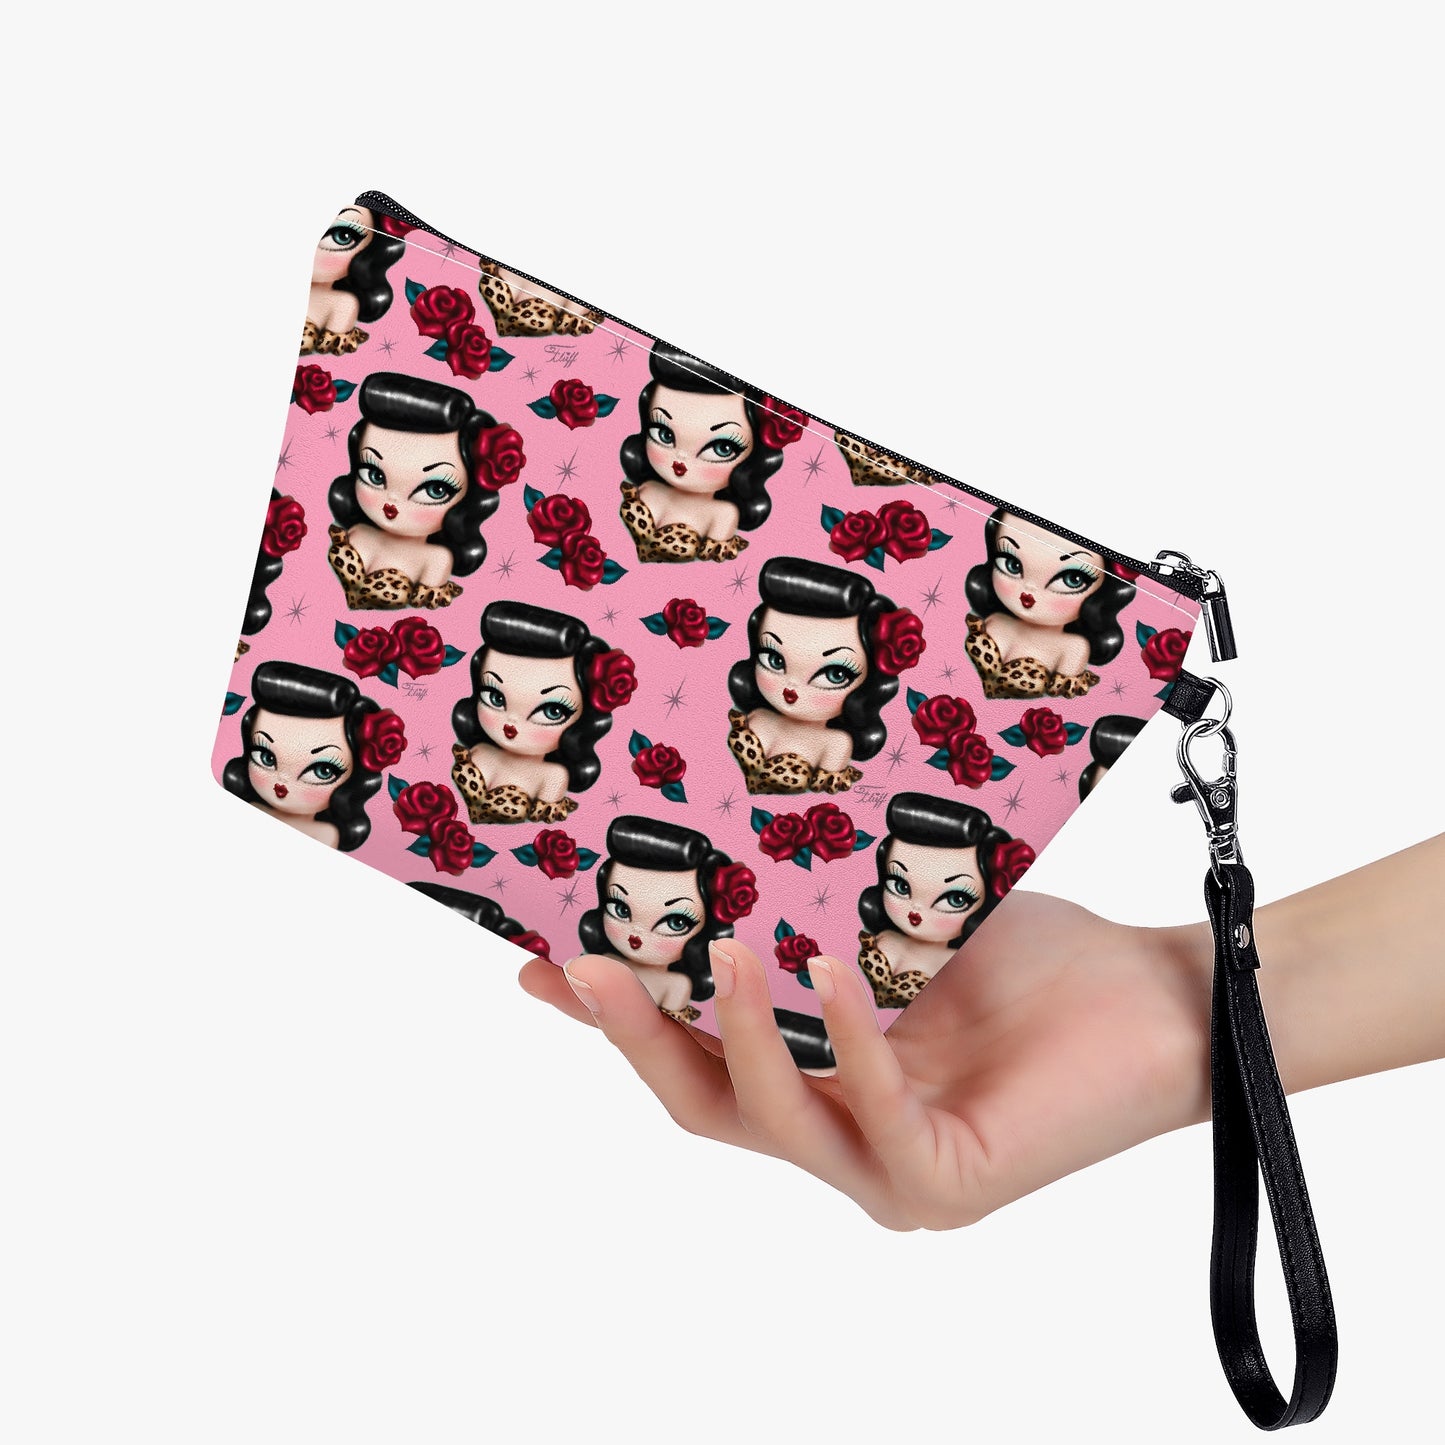 Rockabilly Baby Doll on Pink • Cosmetic Bag